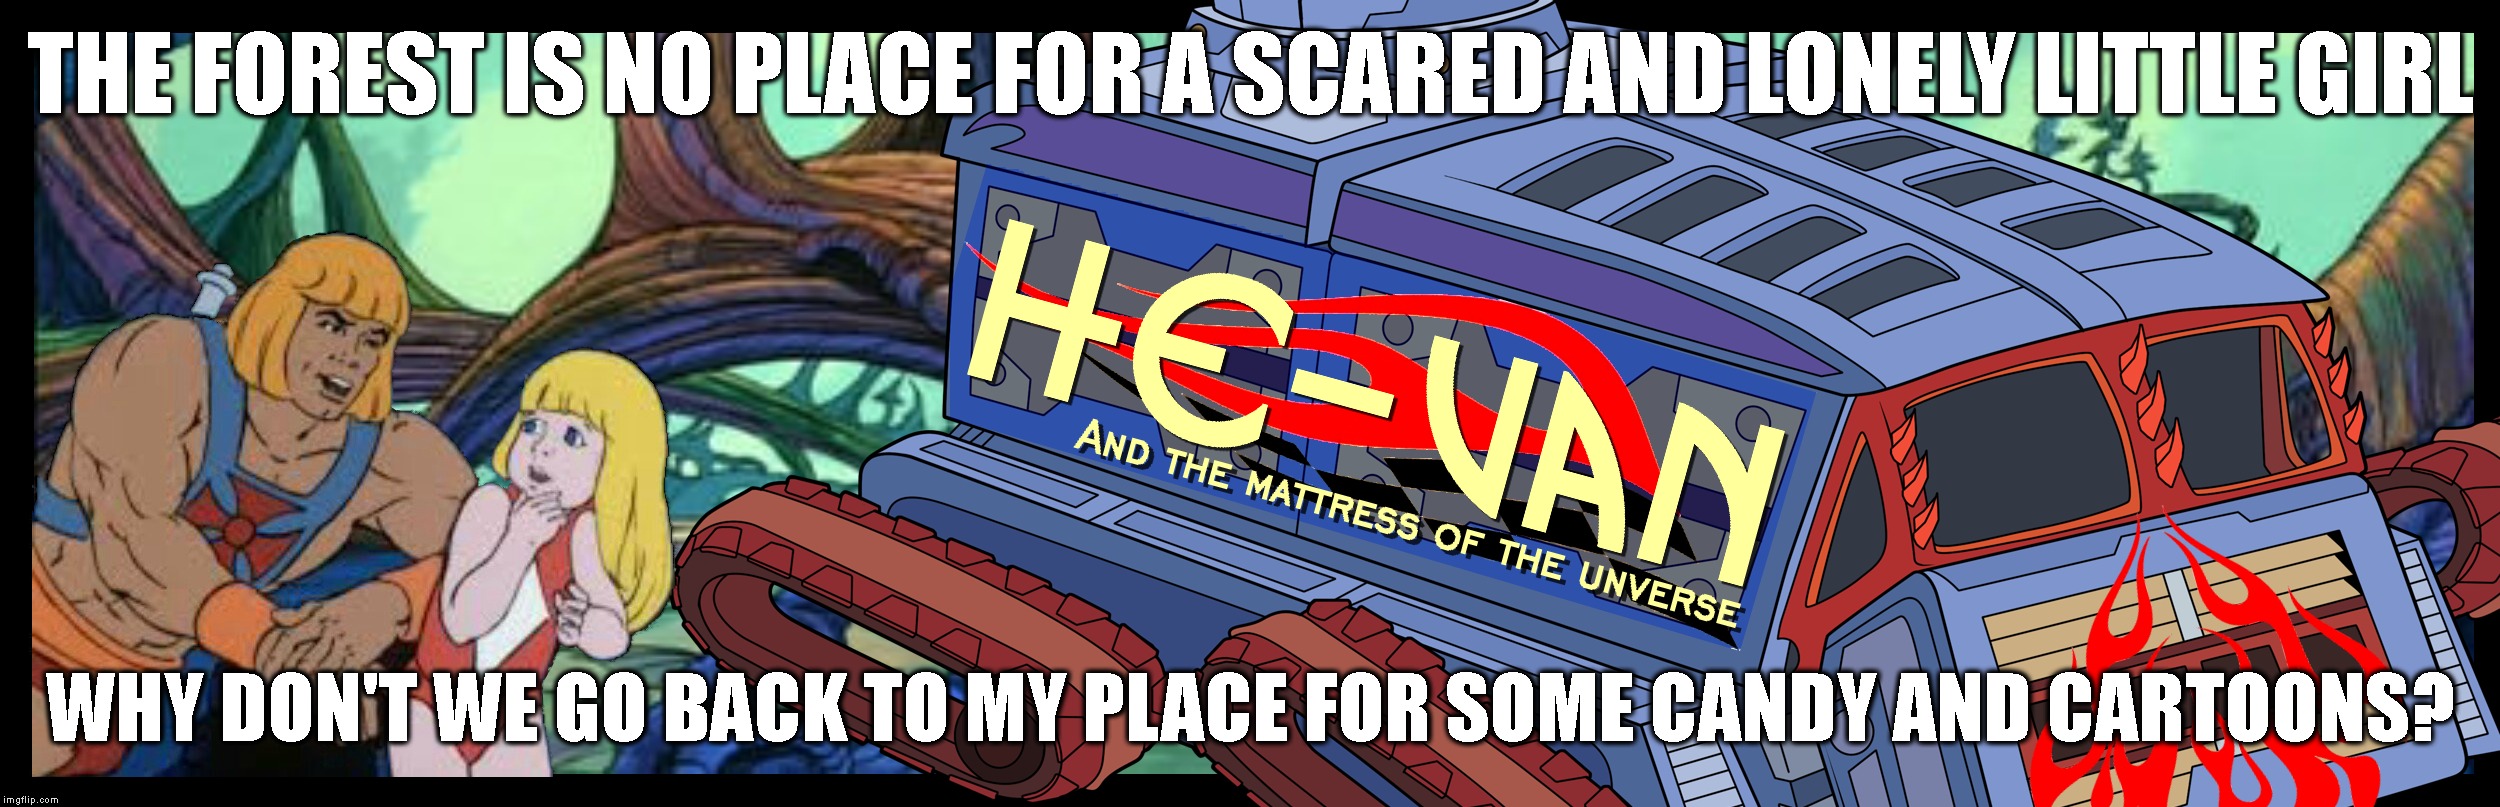 Ever Wonder Why He-Man And Tela Never Got Together? | THE FOREST IS NO PLACE FOR A SCARED AND LONELY LITTLE GIRL; WHY DON'T WE GO BACK TO MY PLACE FOR SOME CANDY AND CARTOONS? | image tagged in creepy,pervert,he-man,holy crap,creep van,dating | made w/ Imgflip meme maker